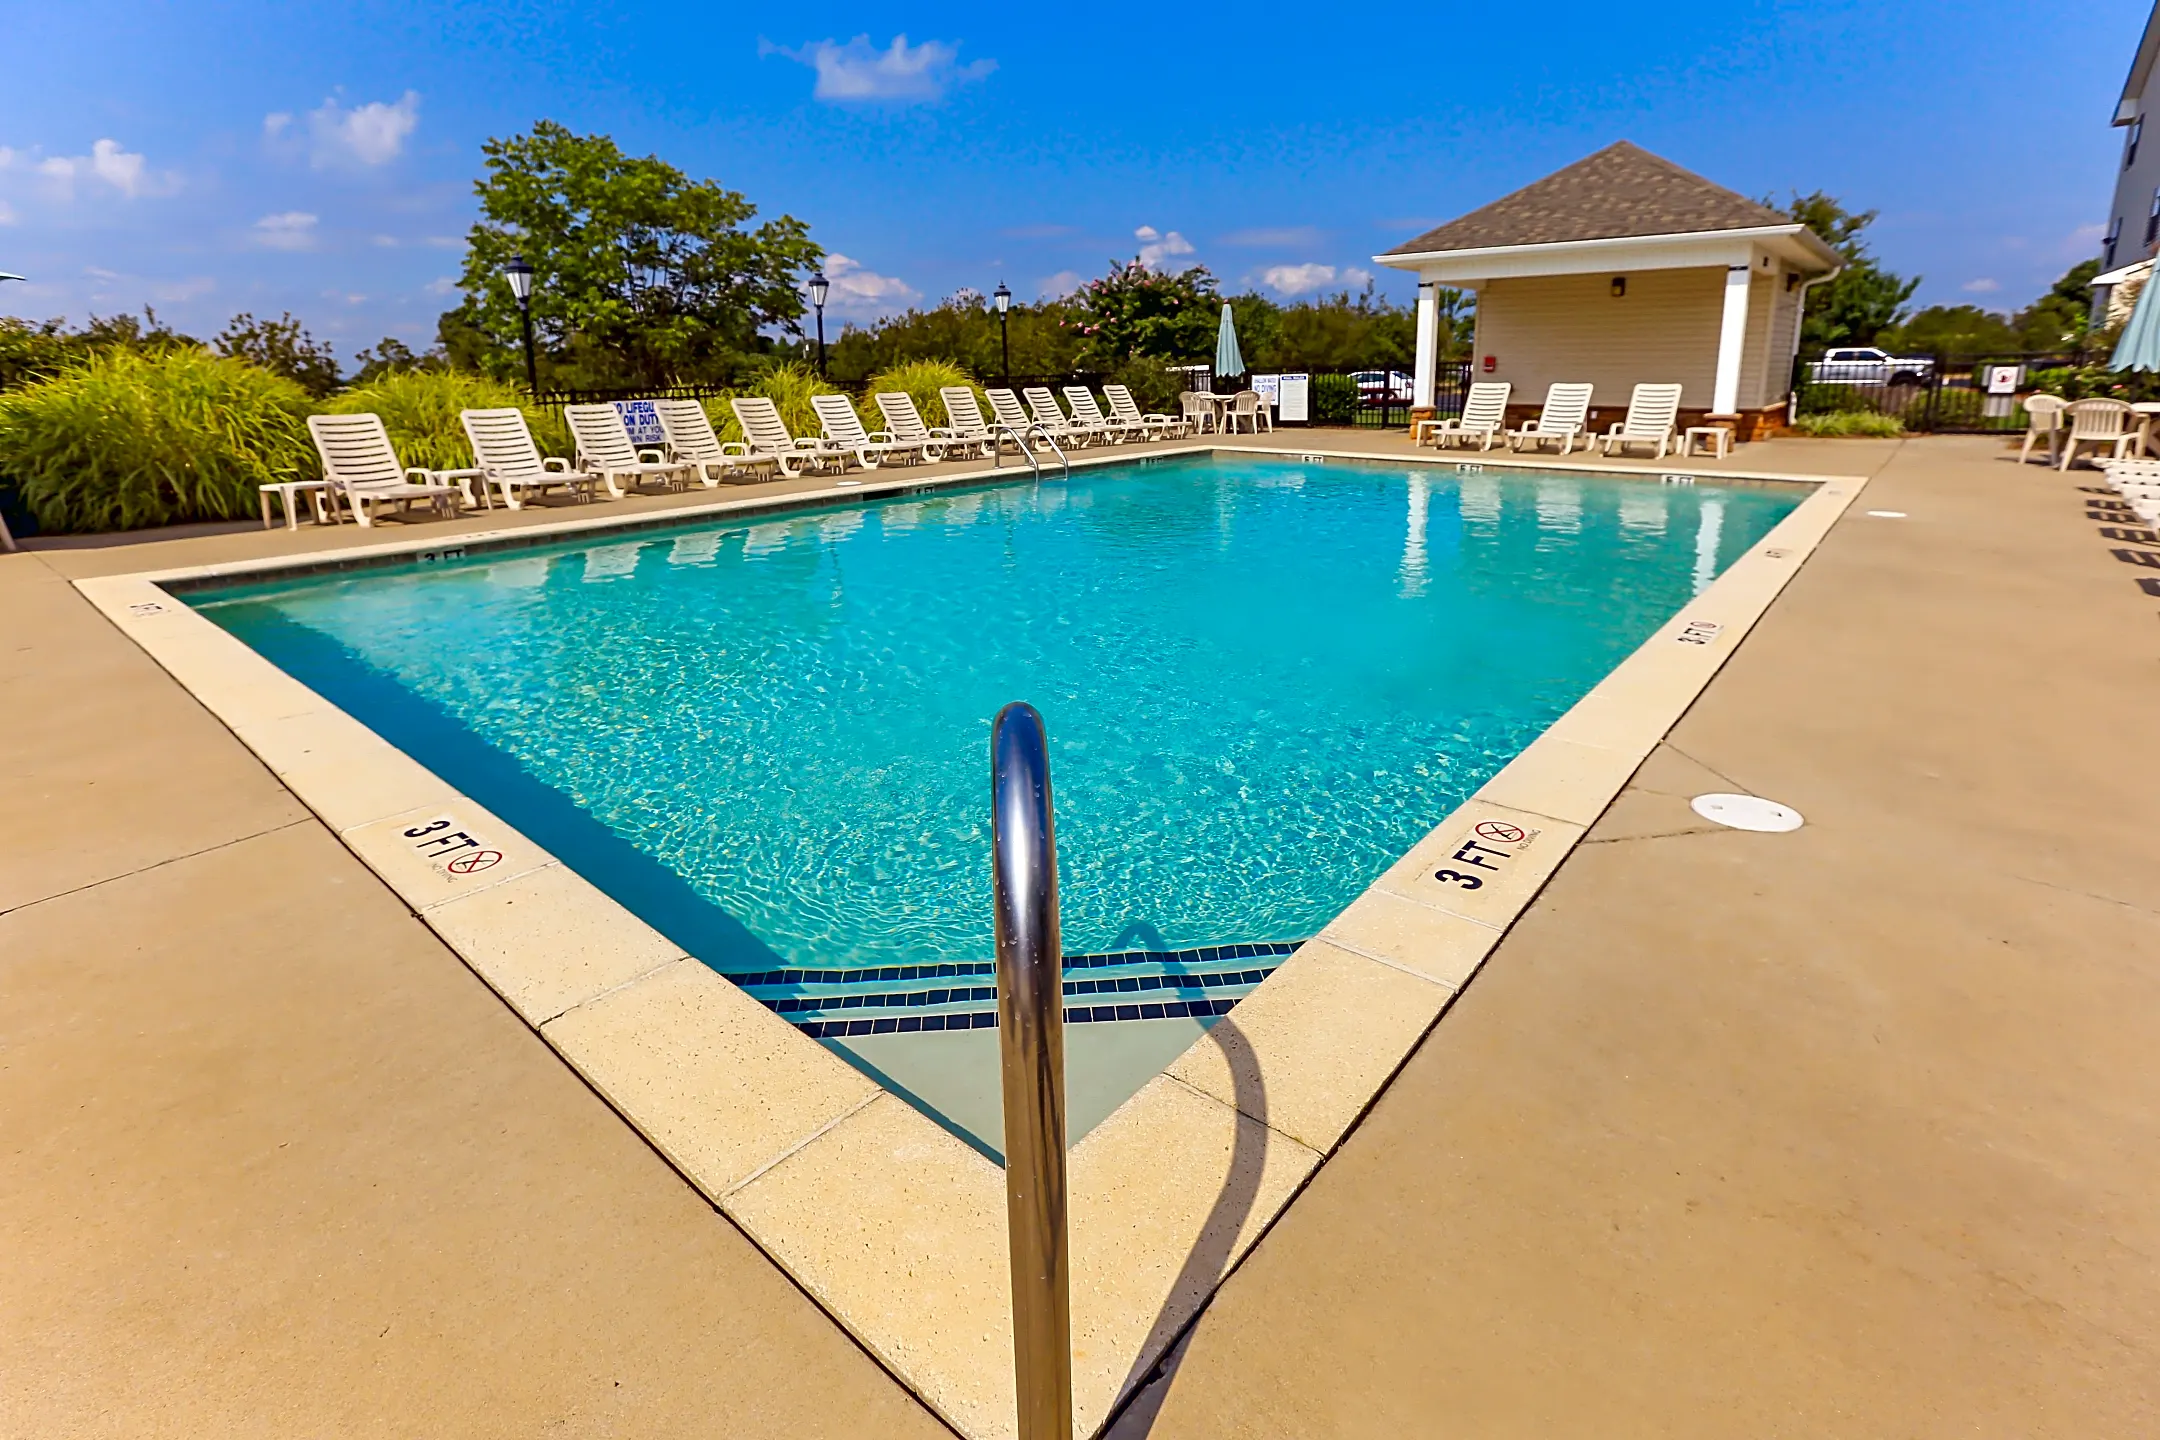 Pool - The Preserve At West View - Greer, SC